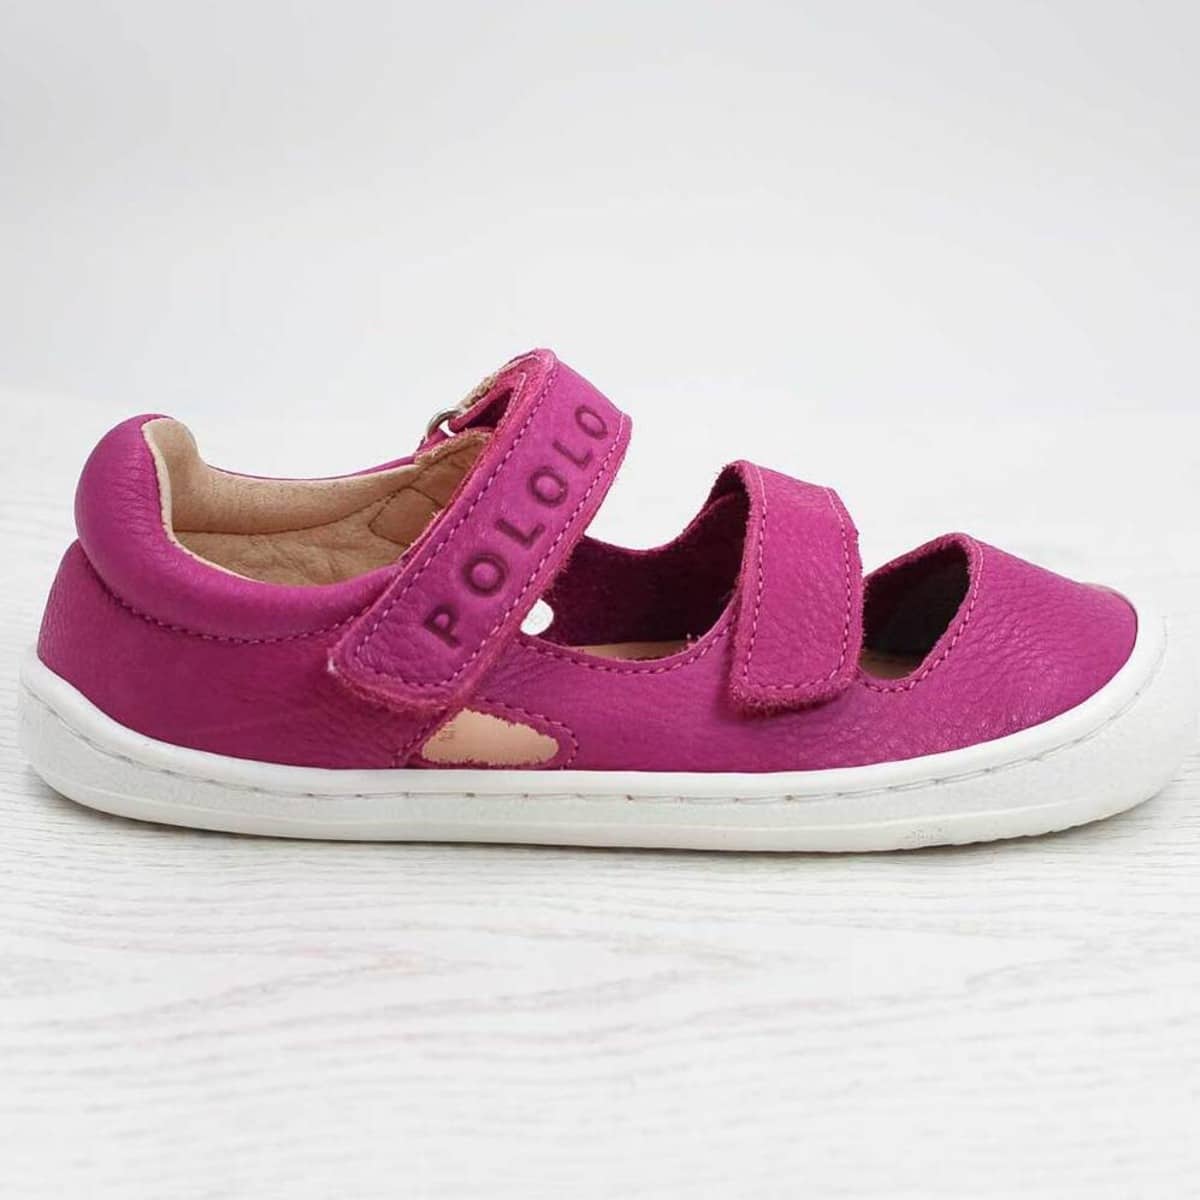 pololo-barfuss-sandale-mare-pink-seitlich